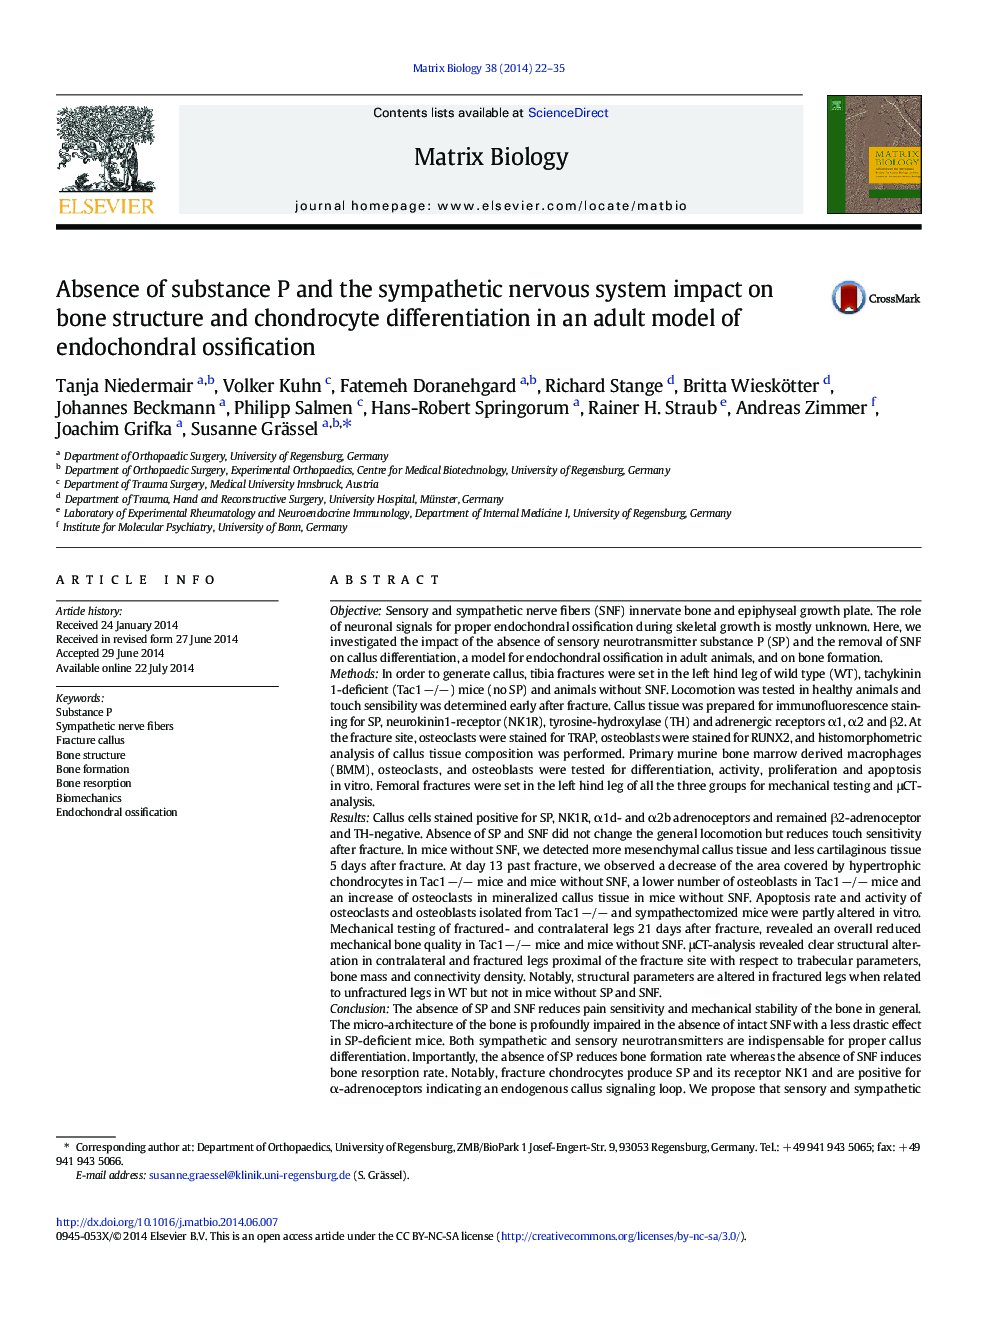 Absence of substance P and the sympathetic nervous system impact on bone structure and chondrocyte differentiation in an adult model of endochondral ossification